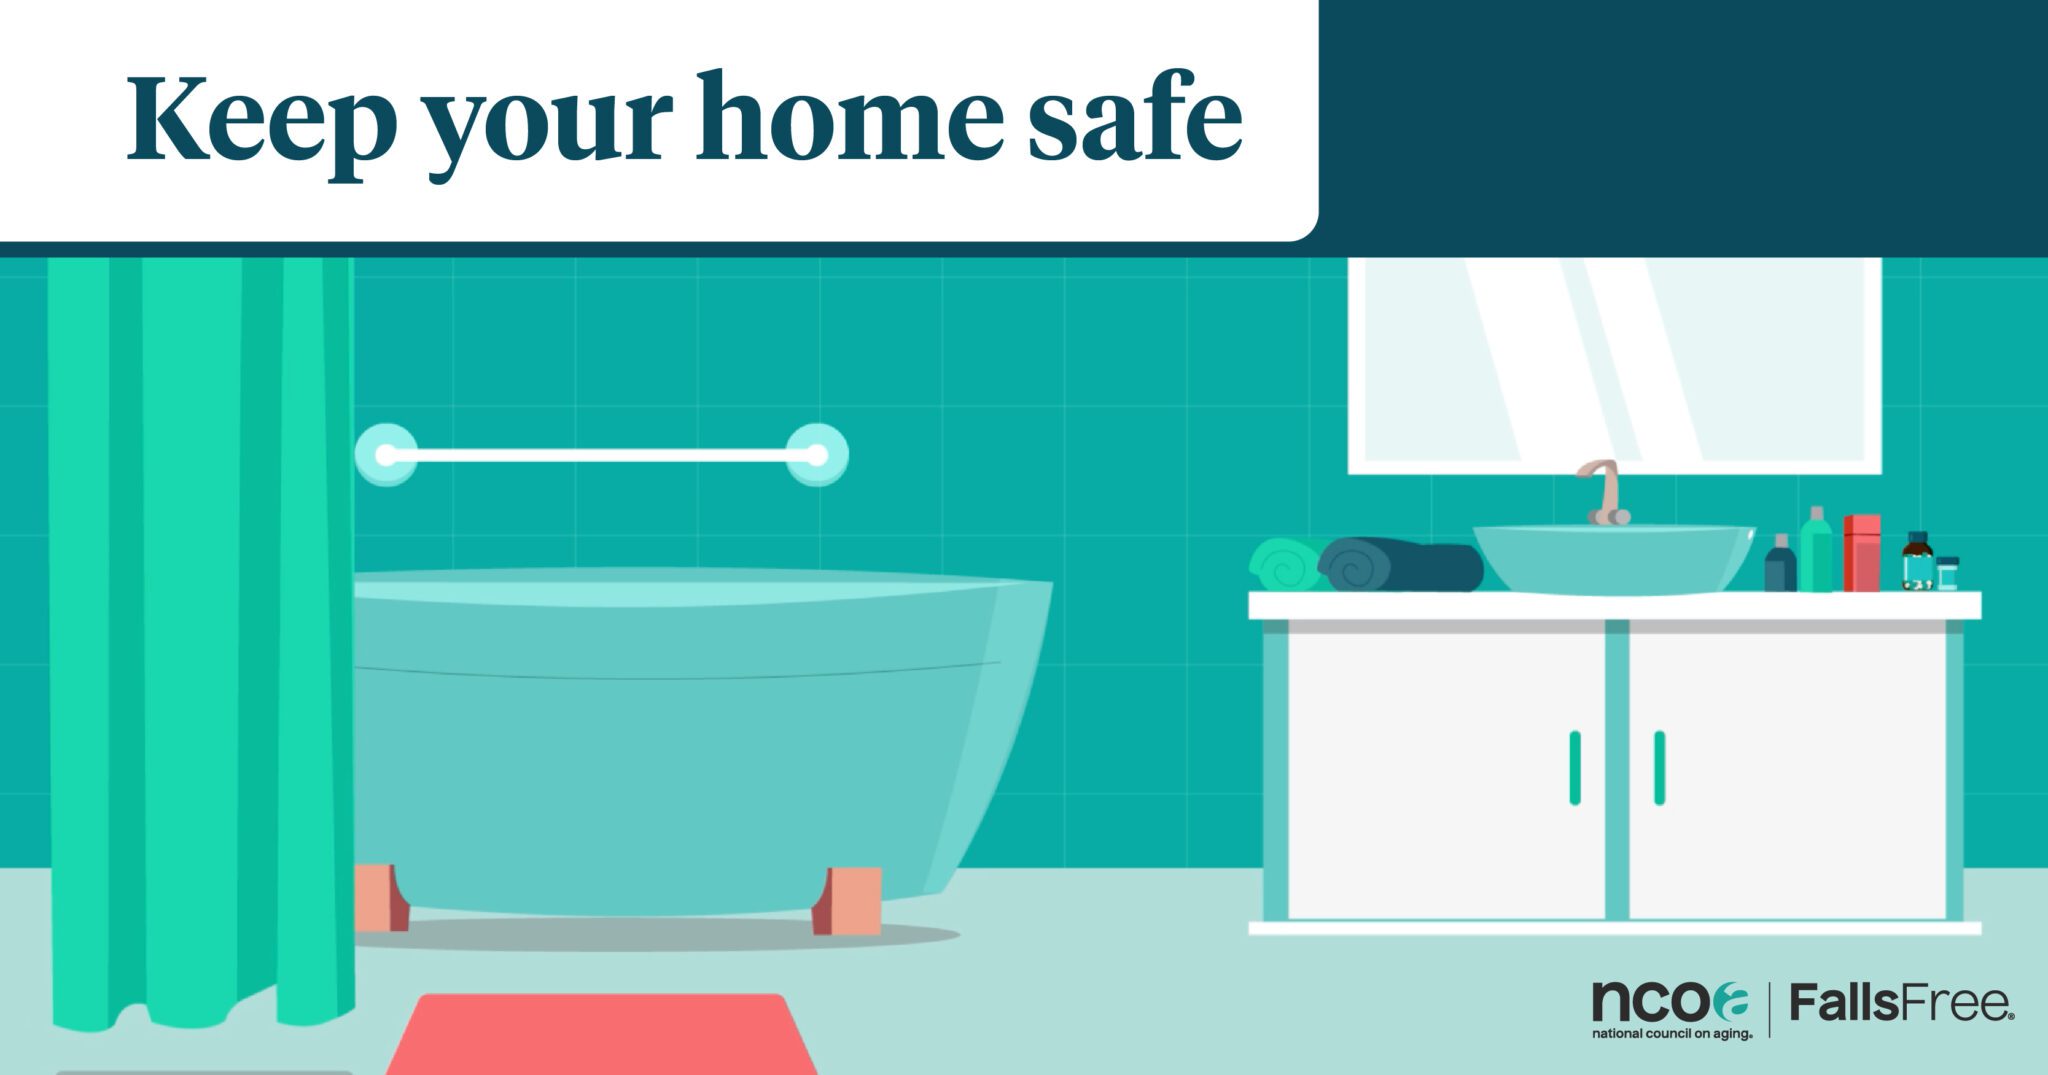 Keep your home safe. Image of a bathroom with a tub and sink with no trip hazards to prevent falls